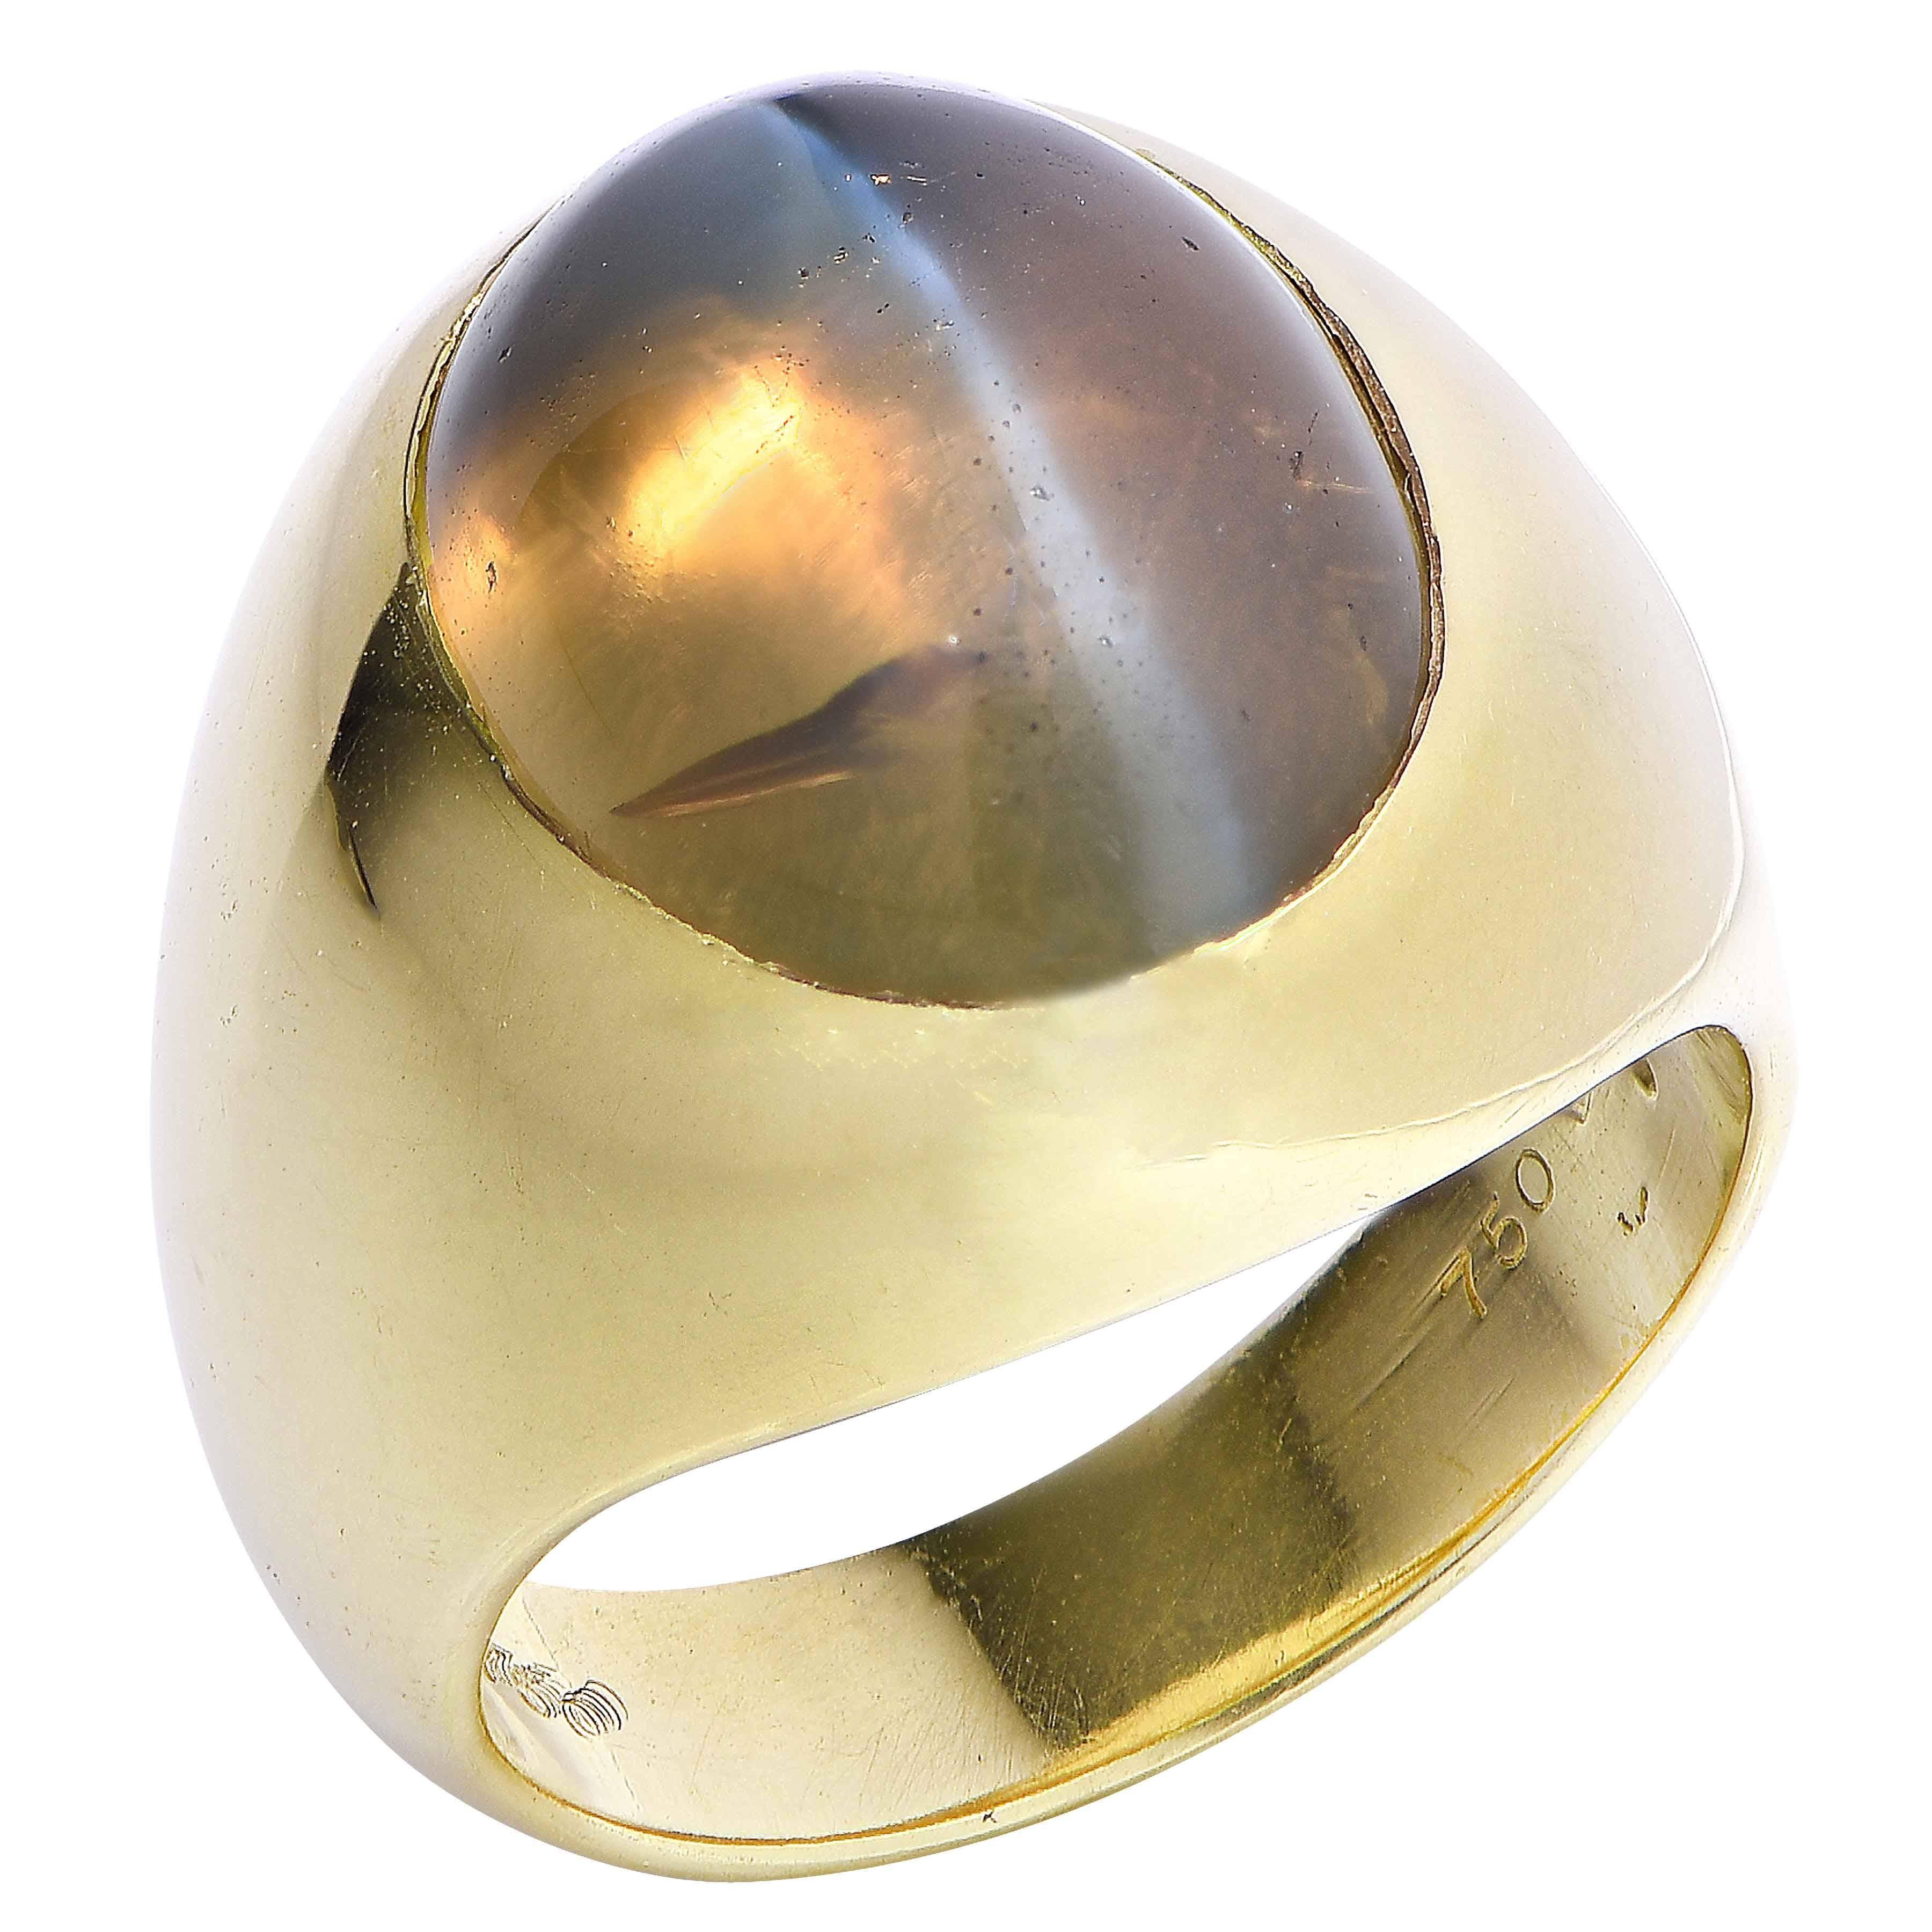 Classic Men's cats eye ring. The chrysoberyl cats eye weighs approximately 17 carats. 

Size 7 1/4. Can be sized.
Metal Type: 18 Karat Yellow Gold
Metal Weight: 16.5 Grams